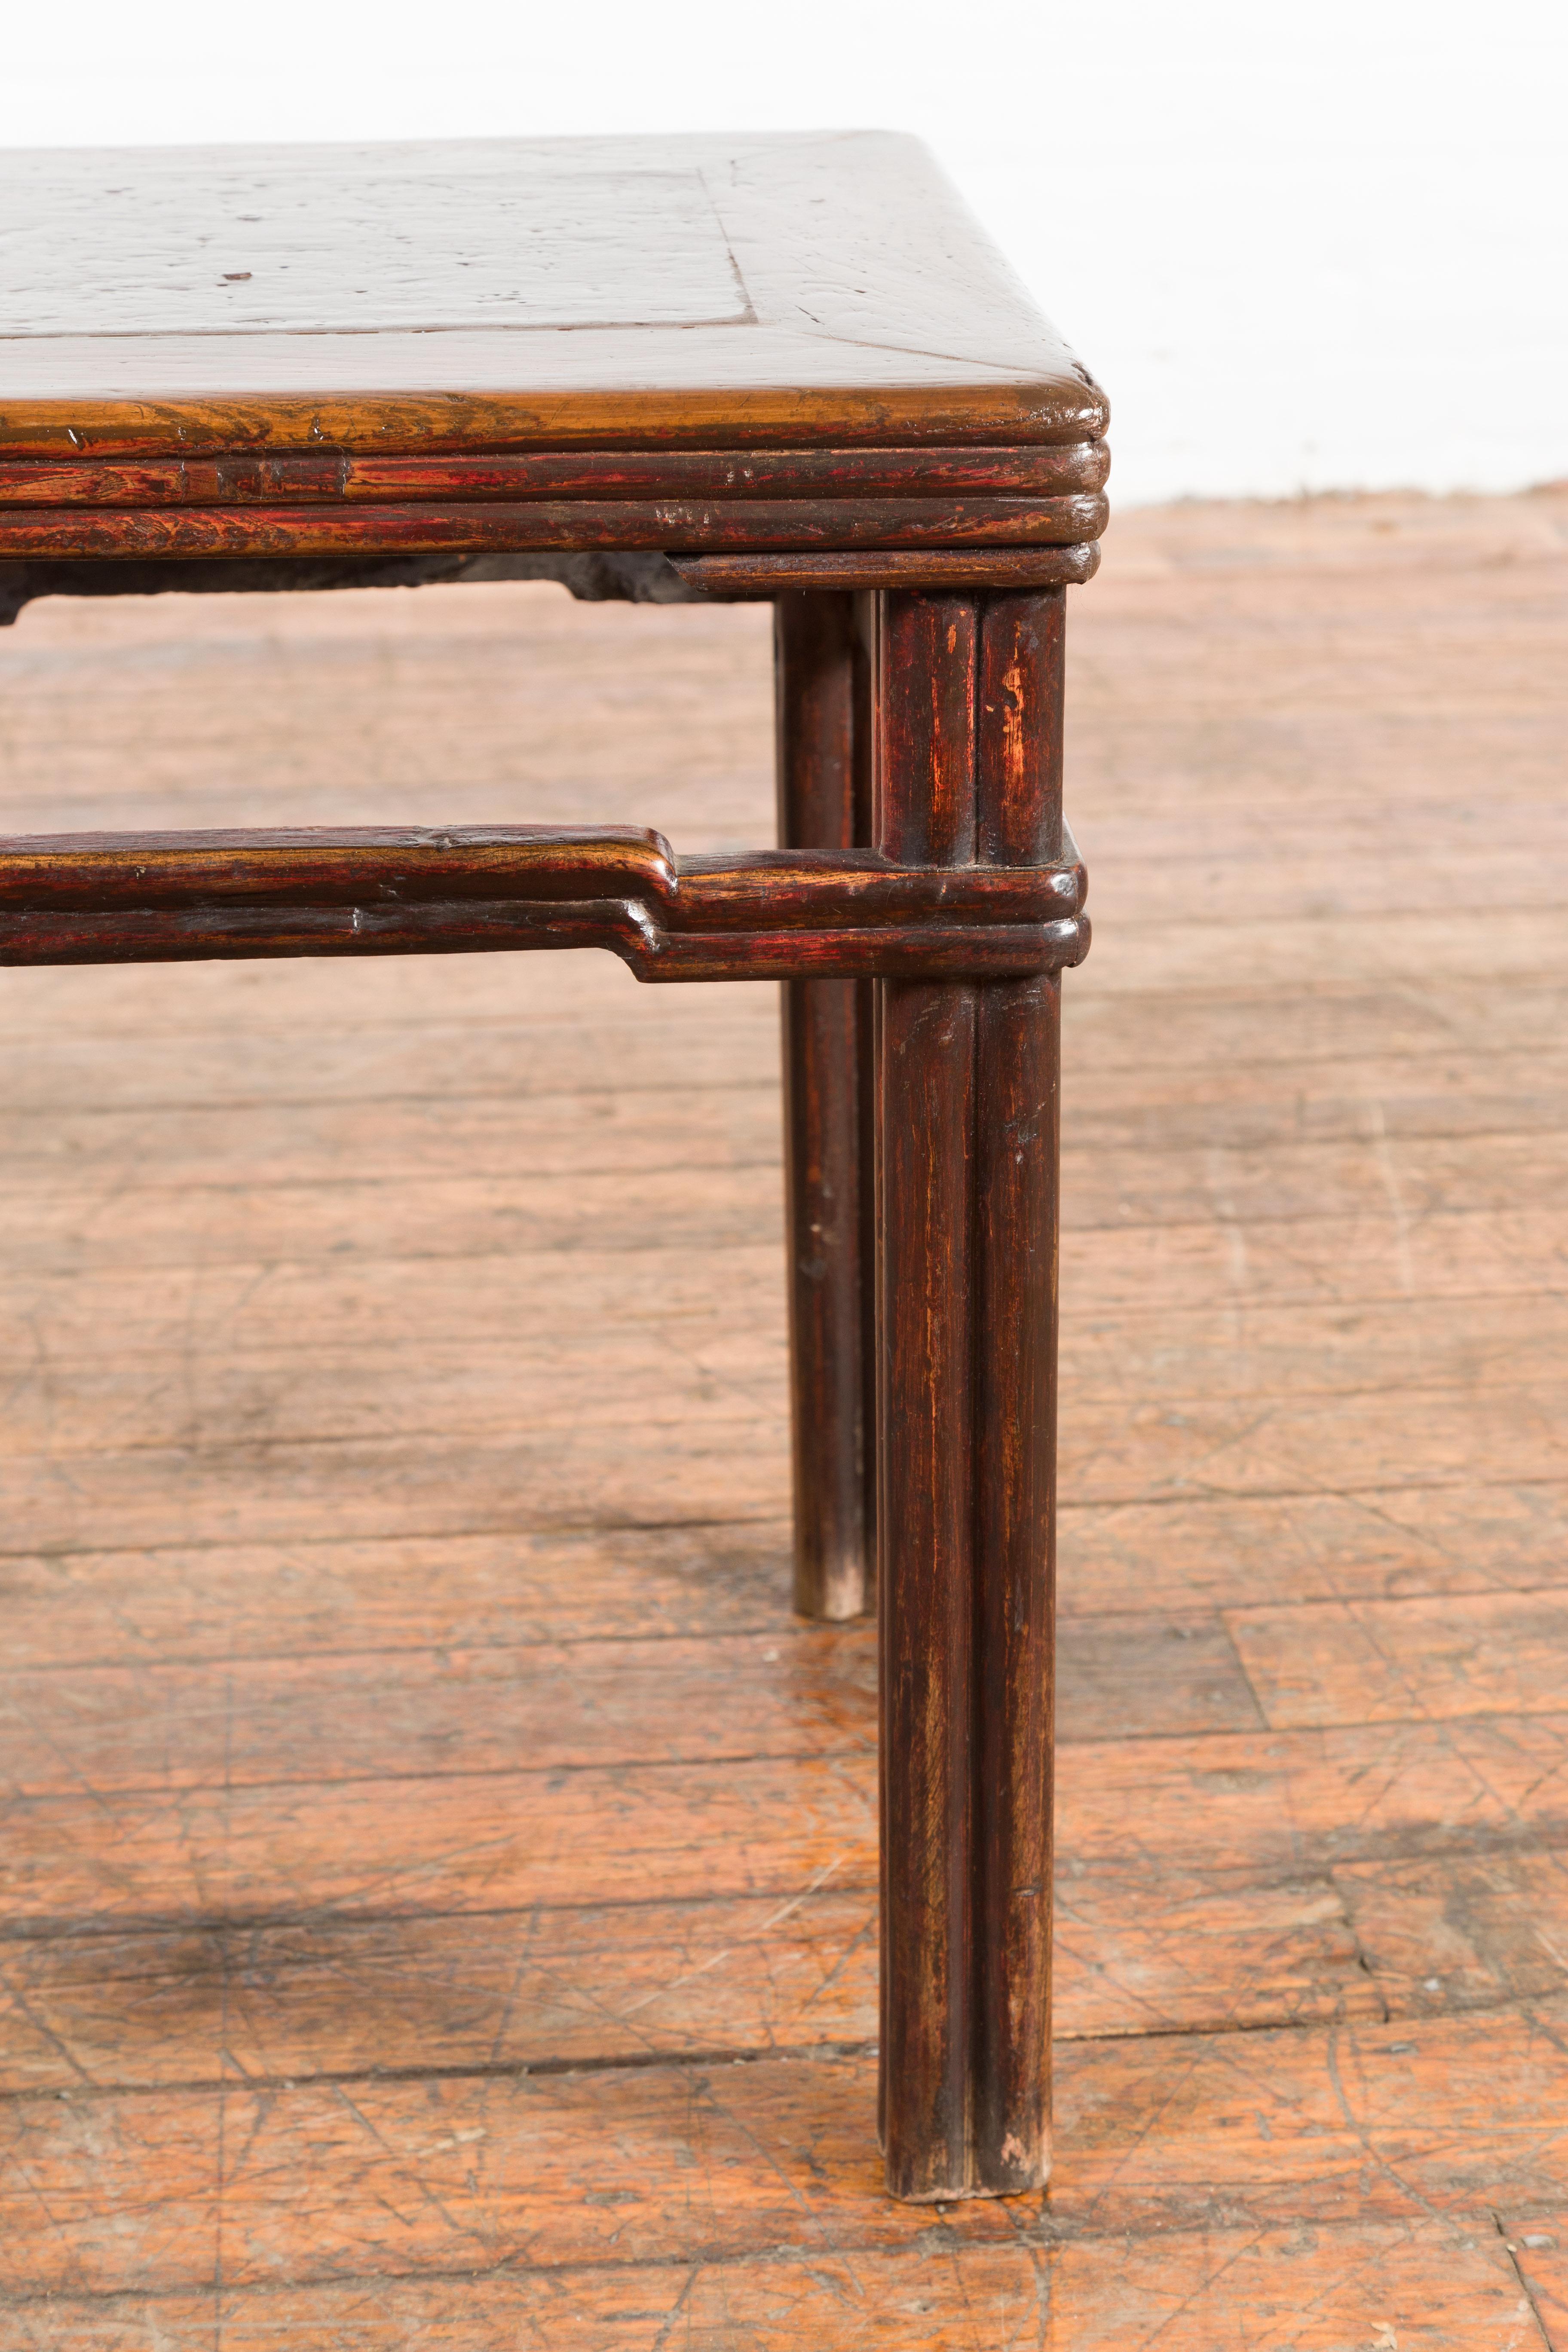 Chinese Qing Dynasty Period 19th Century Side Table with Humpback Stretchers For Sale 3